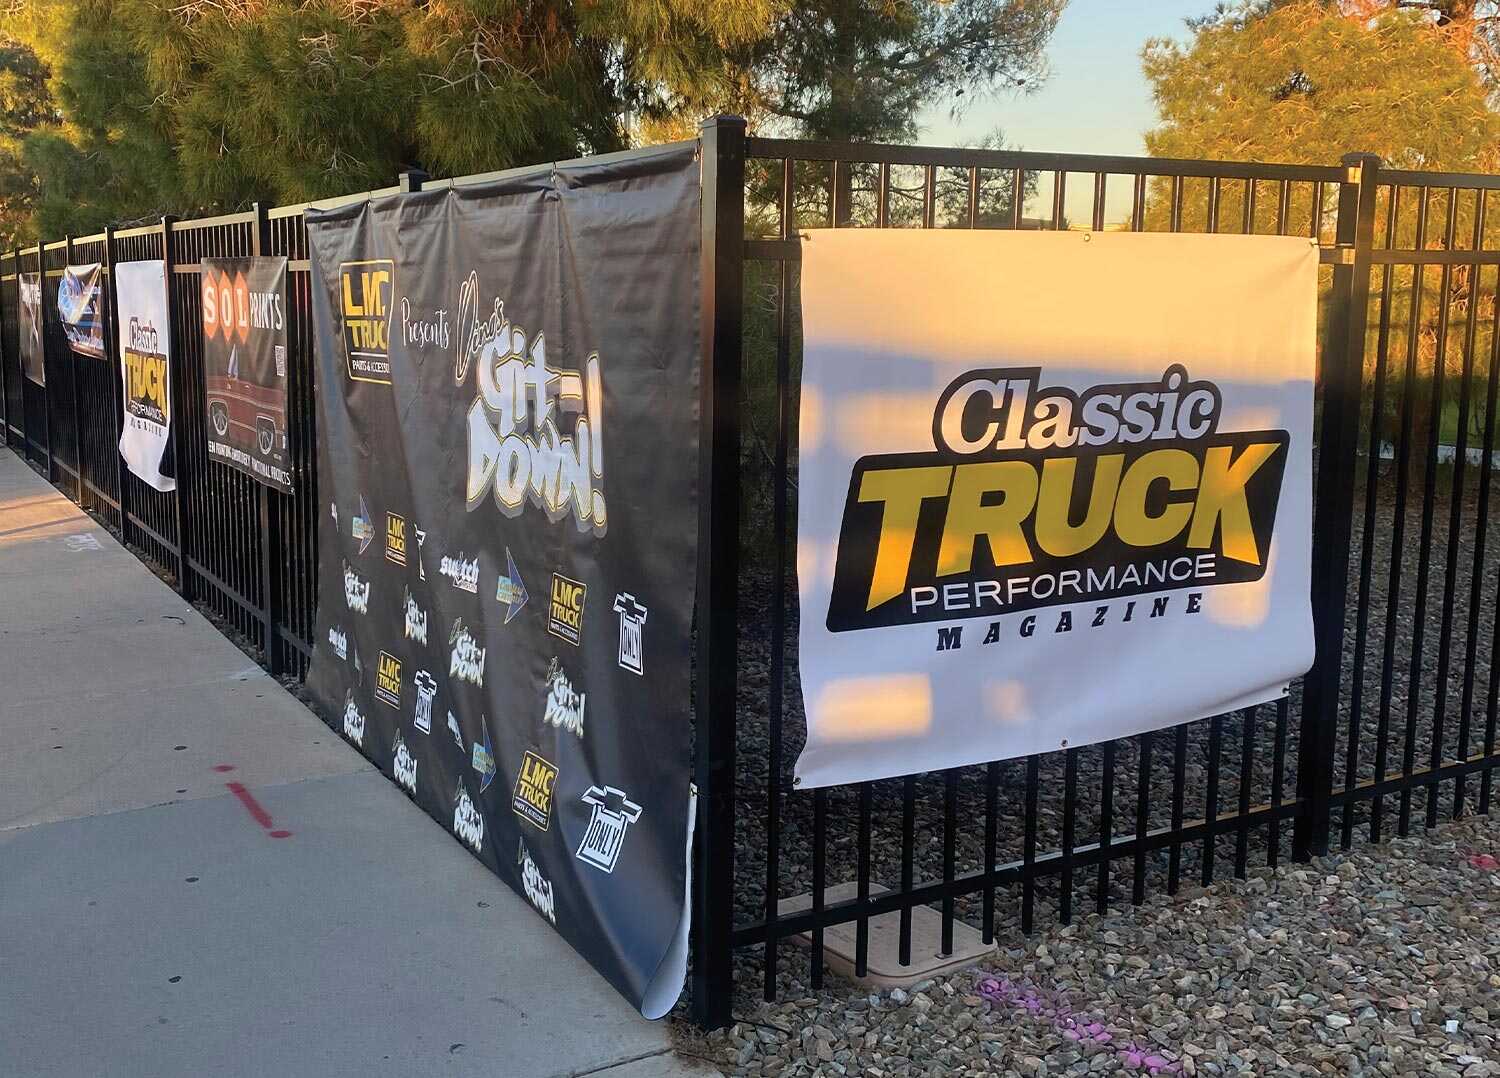 a Classic Truck Performance Magazine banner affixed to a metal fence